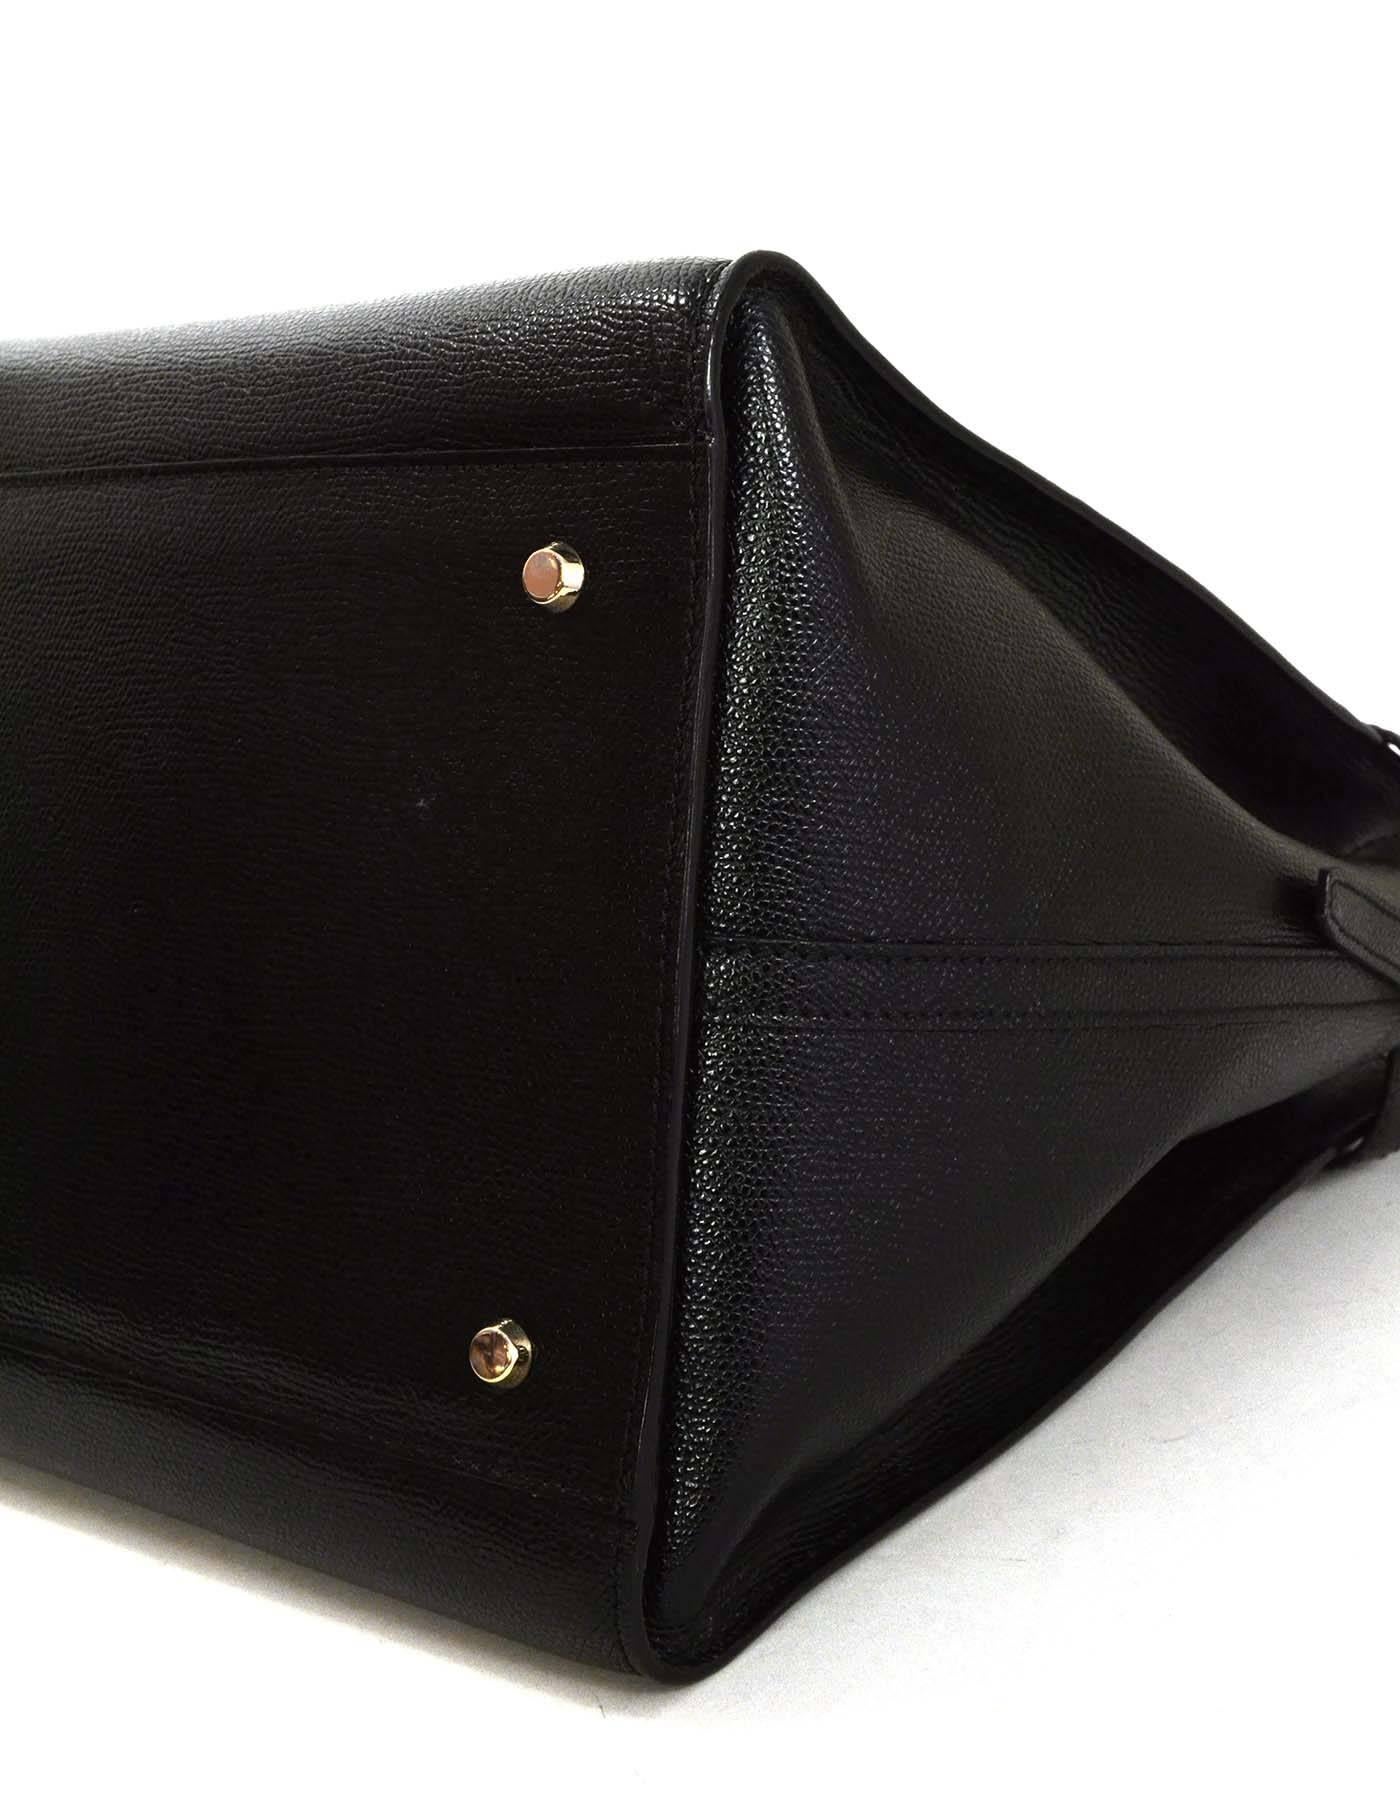 Women's Valextra Black Textured Leather Large B-Cube Tote Bag SHW  rt. $3, 700